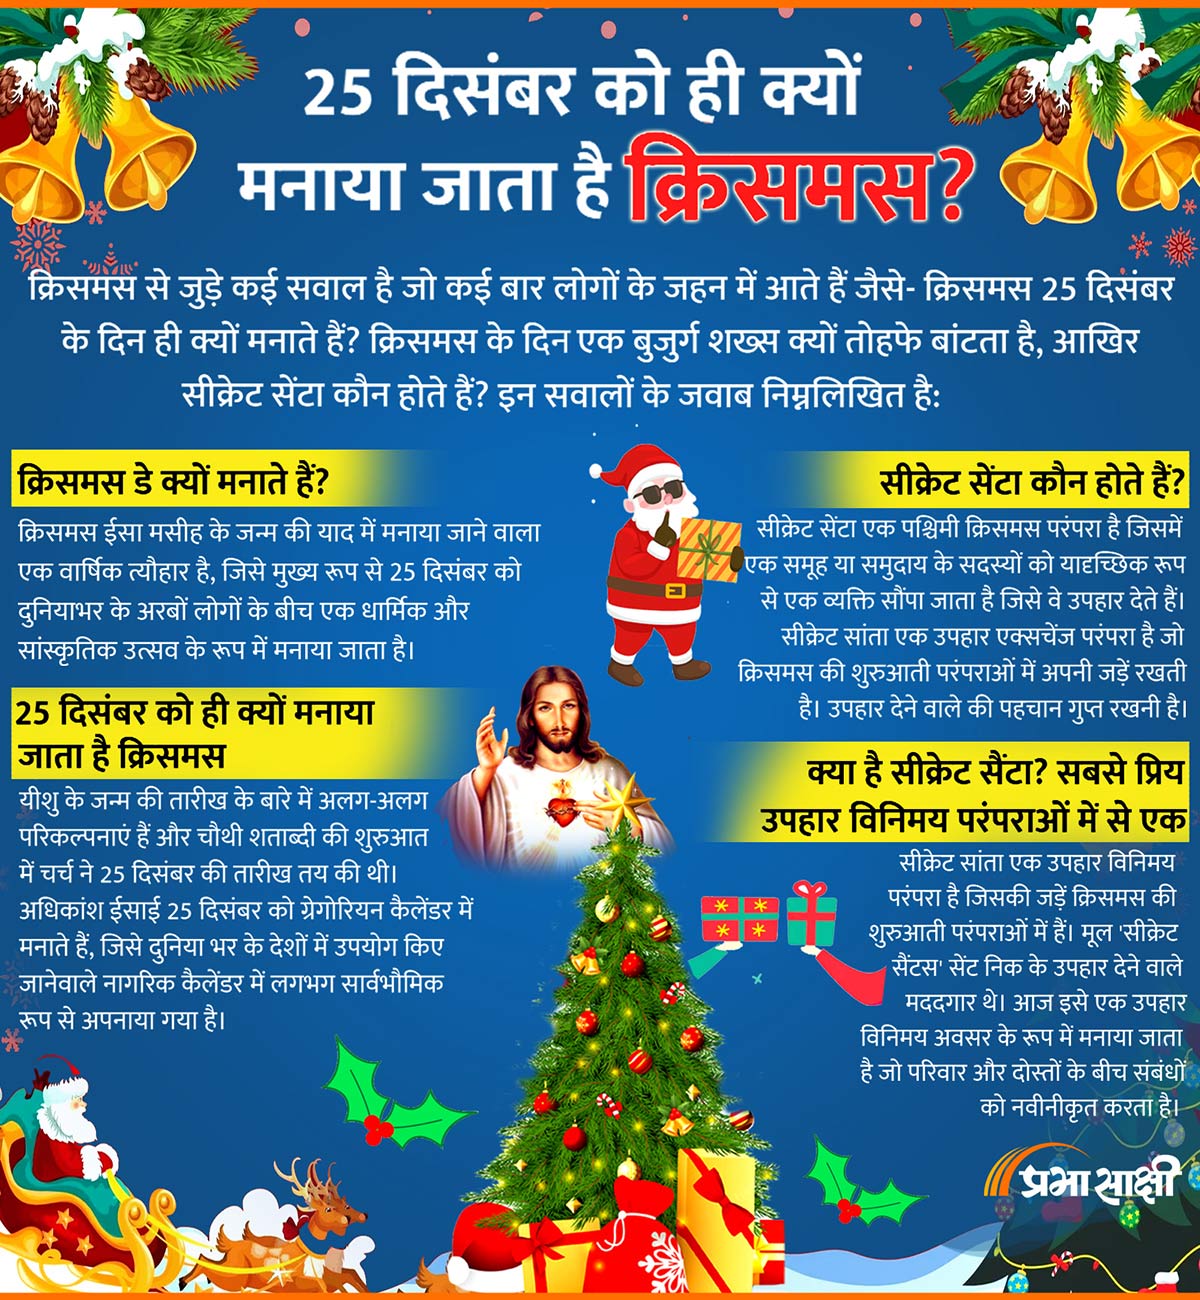 Why is Christmas celebrated only on 25 December?